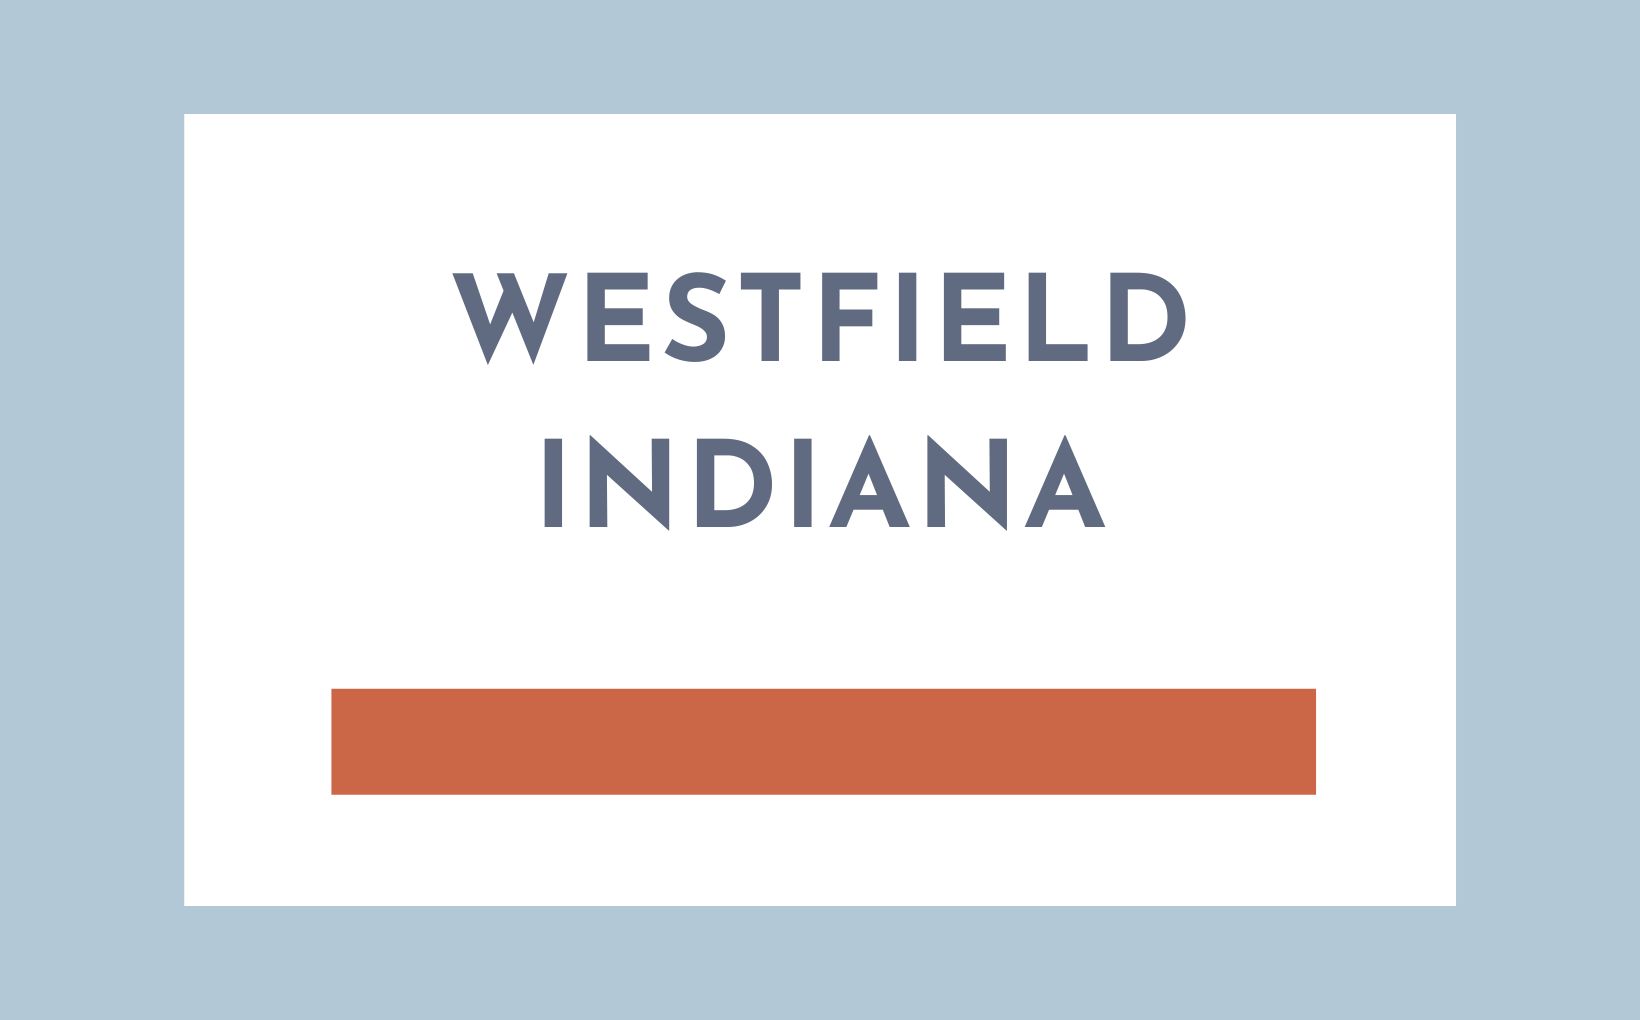 Westfield Indiana feature image